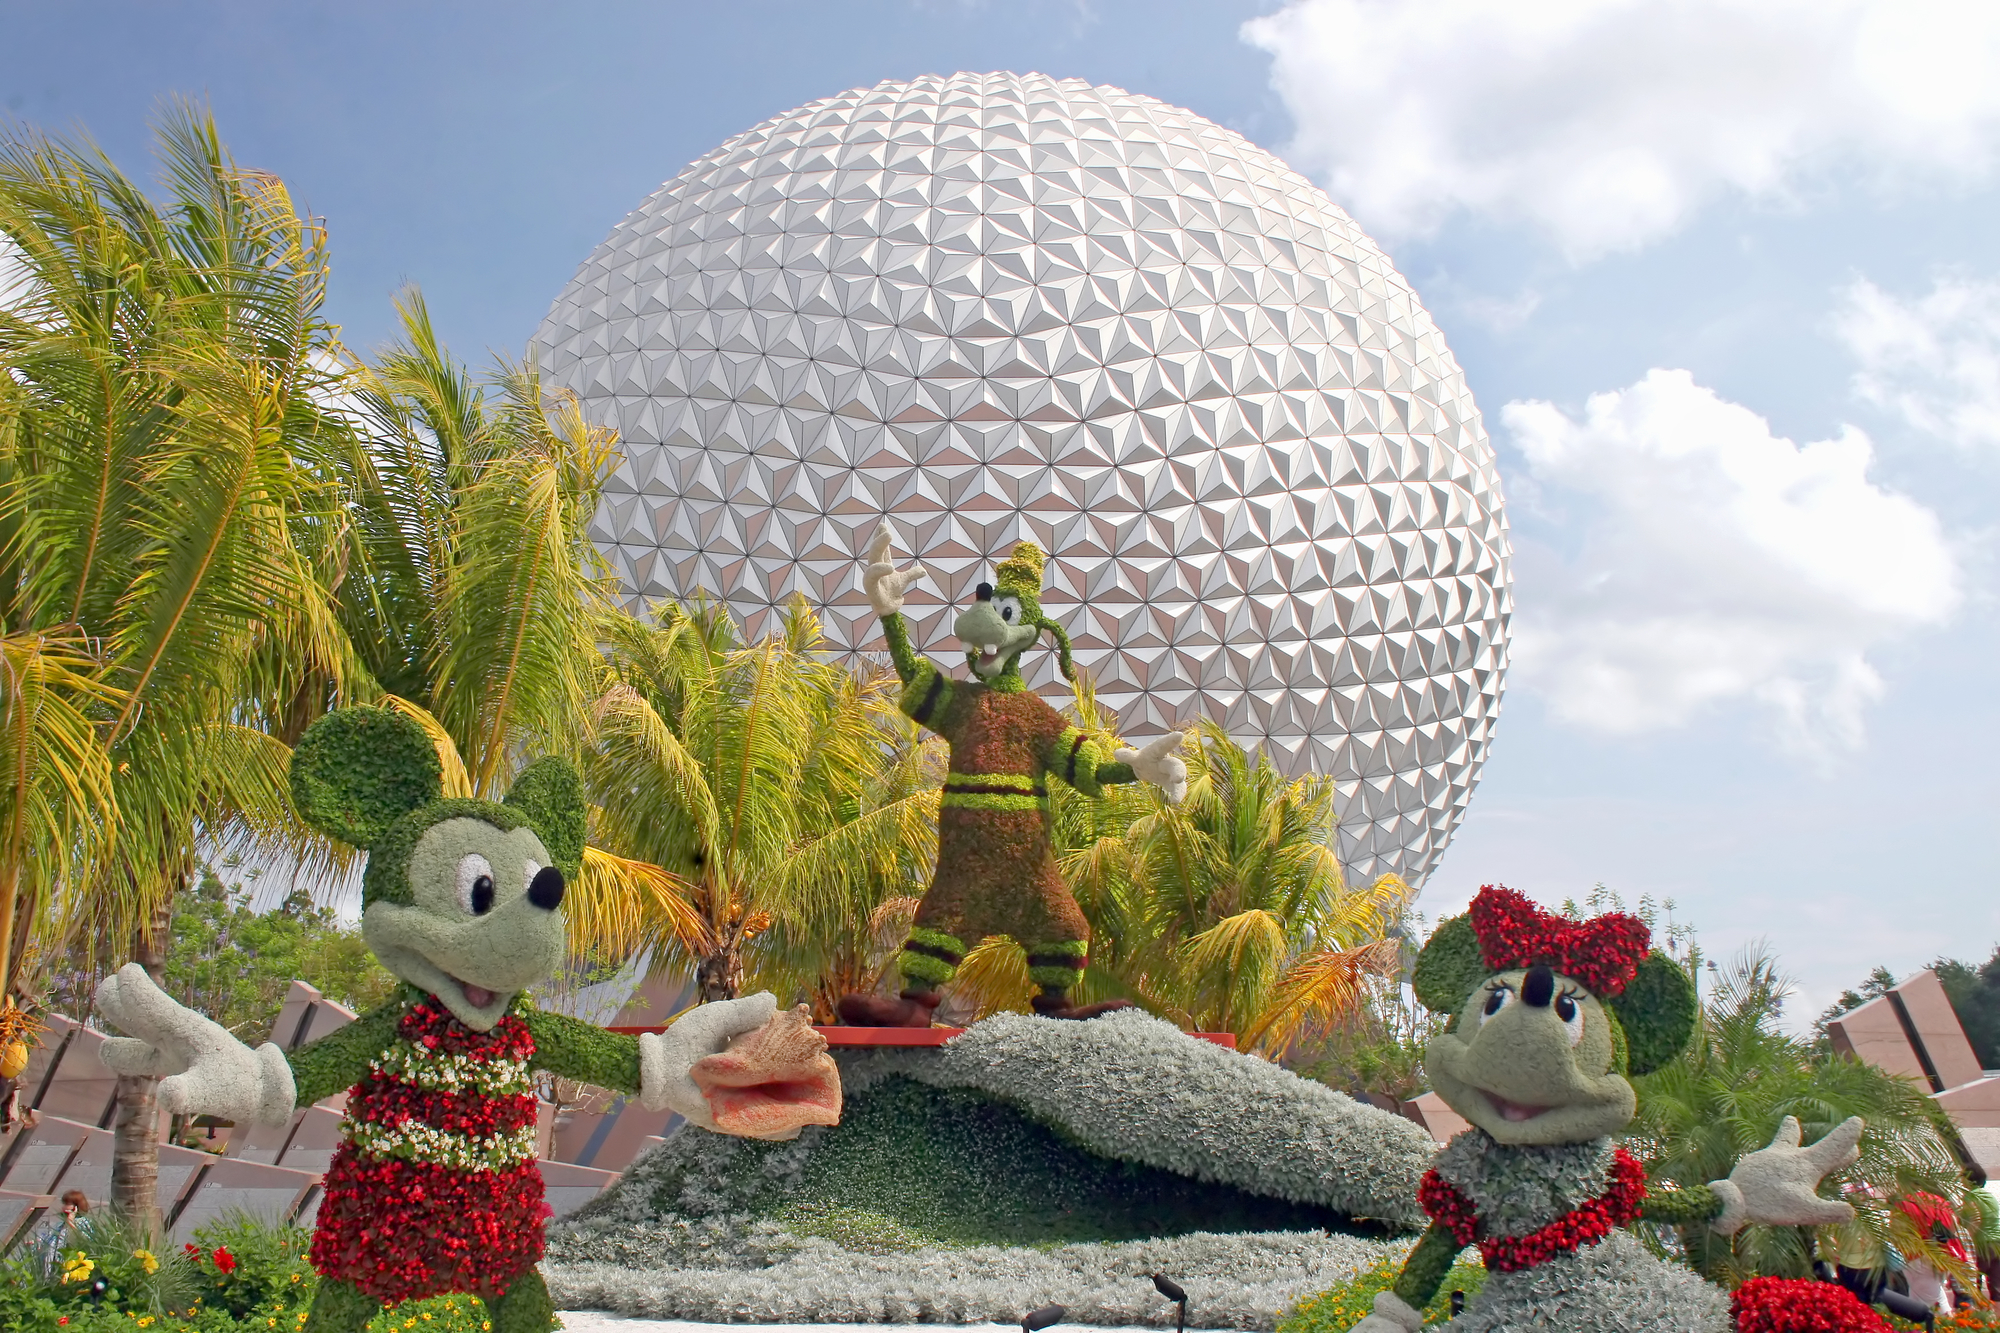 Walt Disney World on a Budget: 7 Essential Tips to Save Money on your Next Vacation featured by top US Disney blogger, Marcie and the Mouse: Save money with Visa Chases to enjoy private meet and greets at Epcot